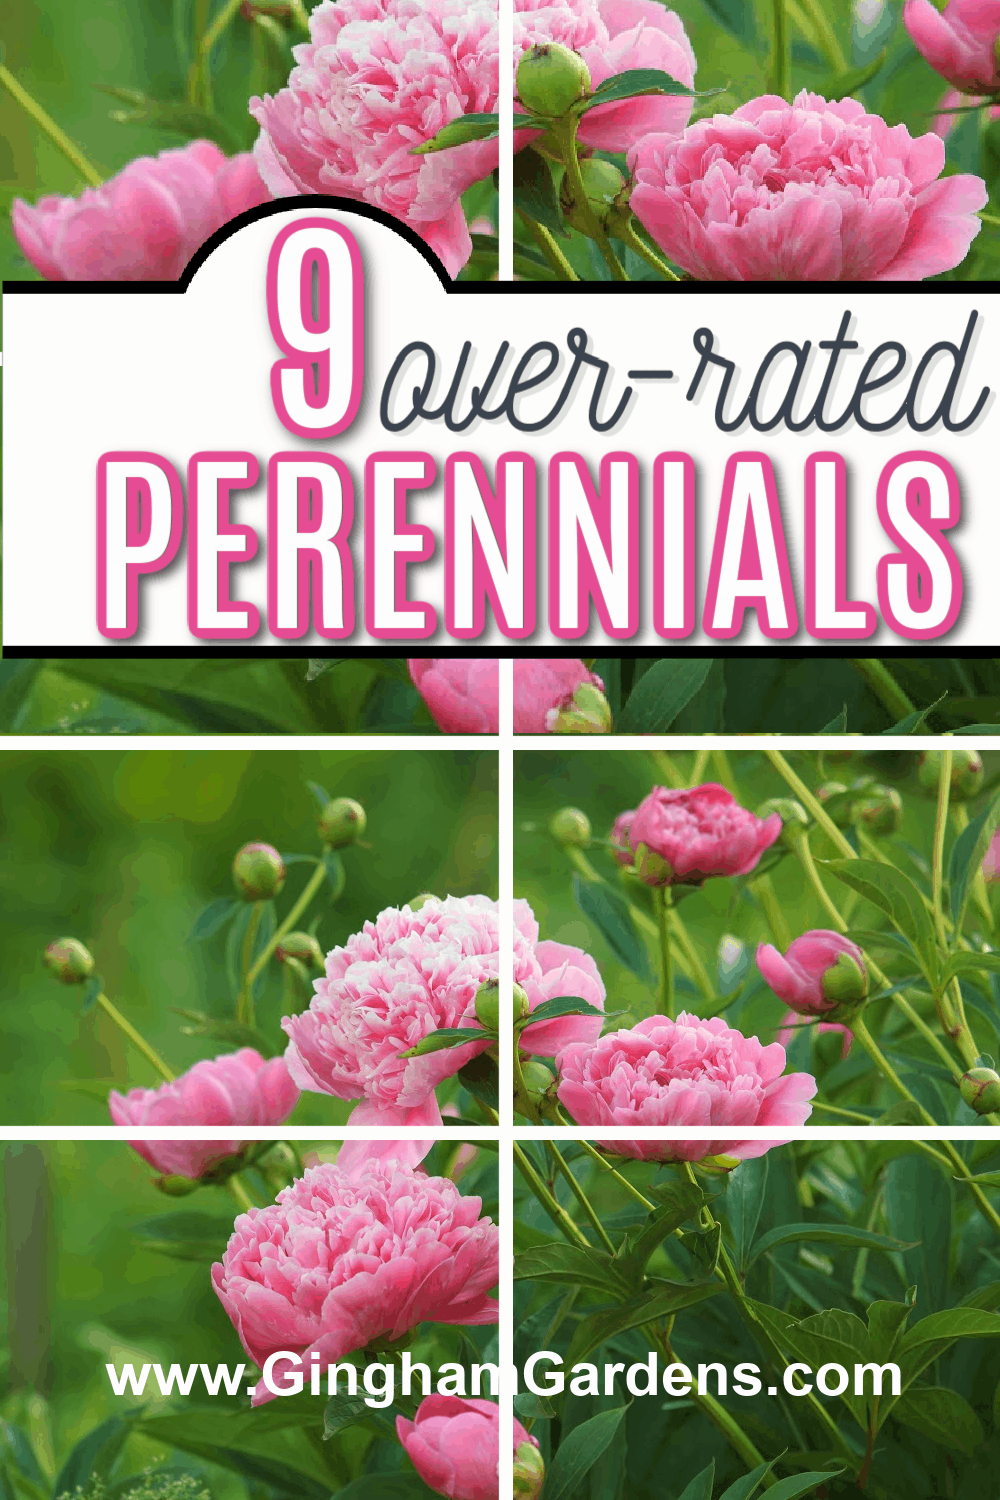 Images of Peony Flowers with text overlay 9 over-rated Perennials